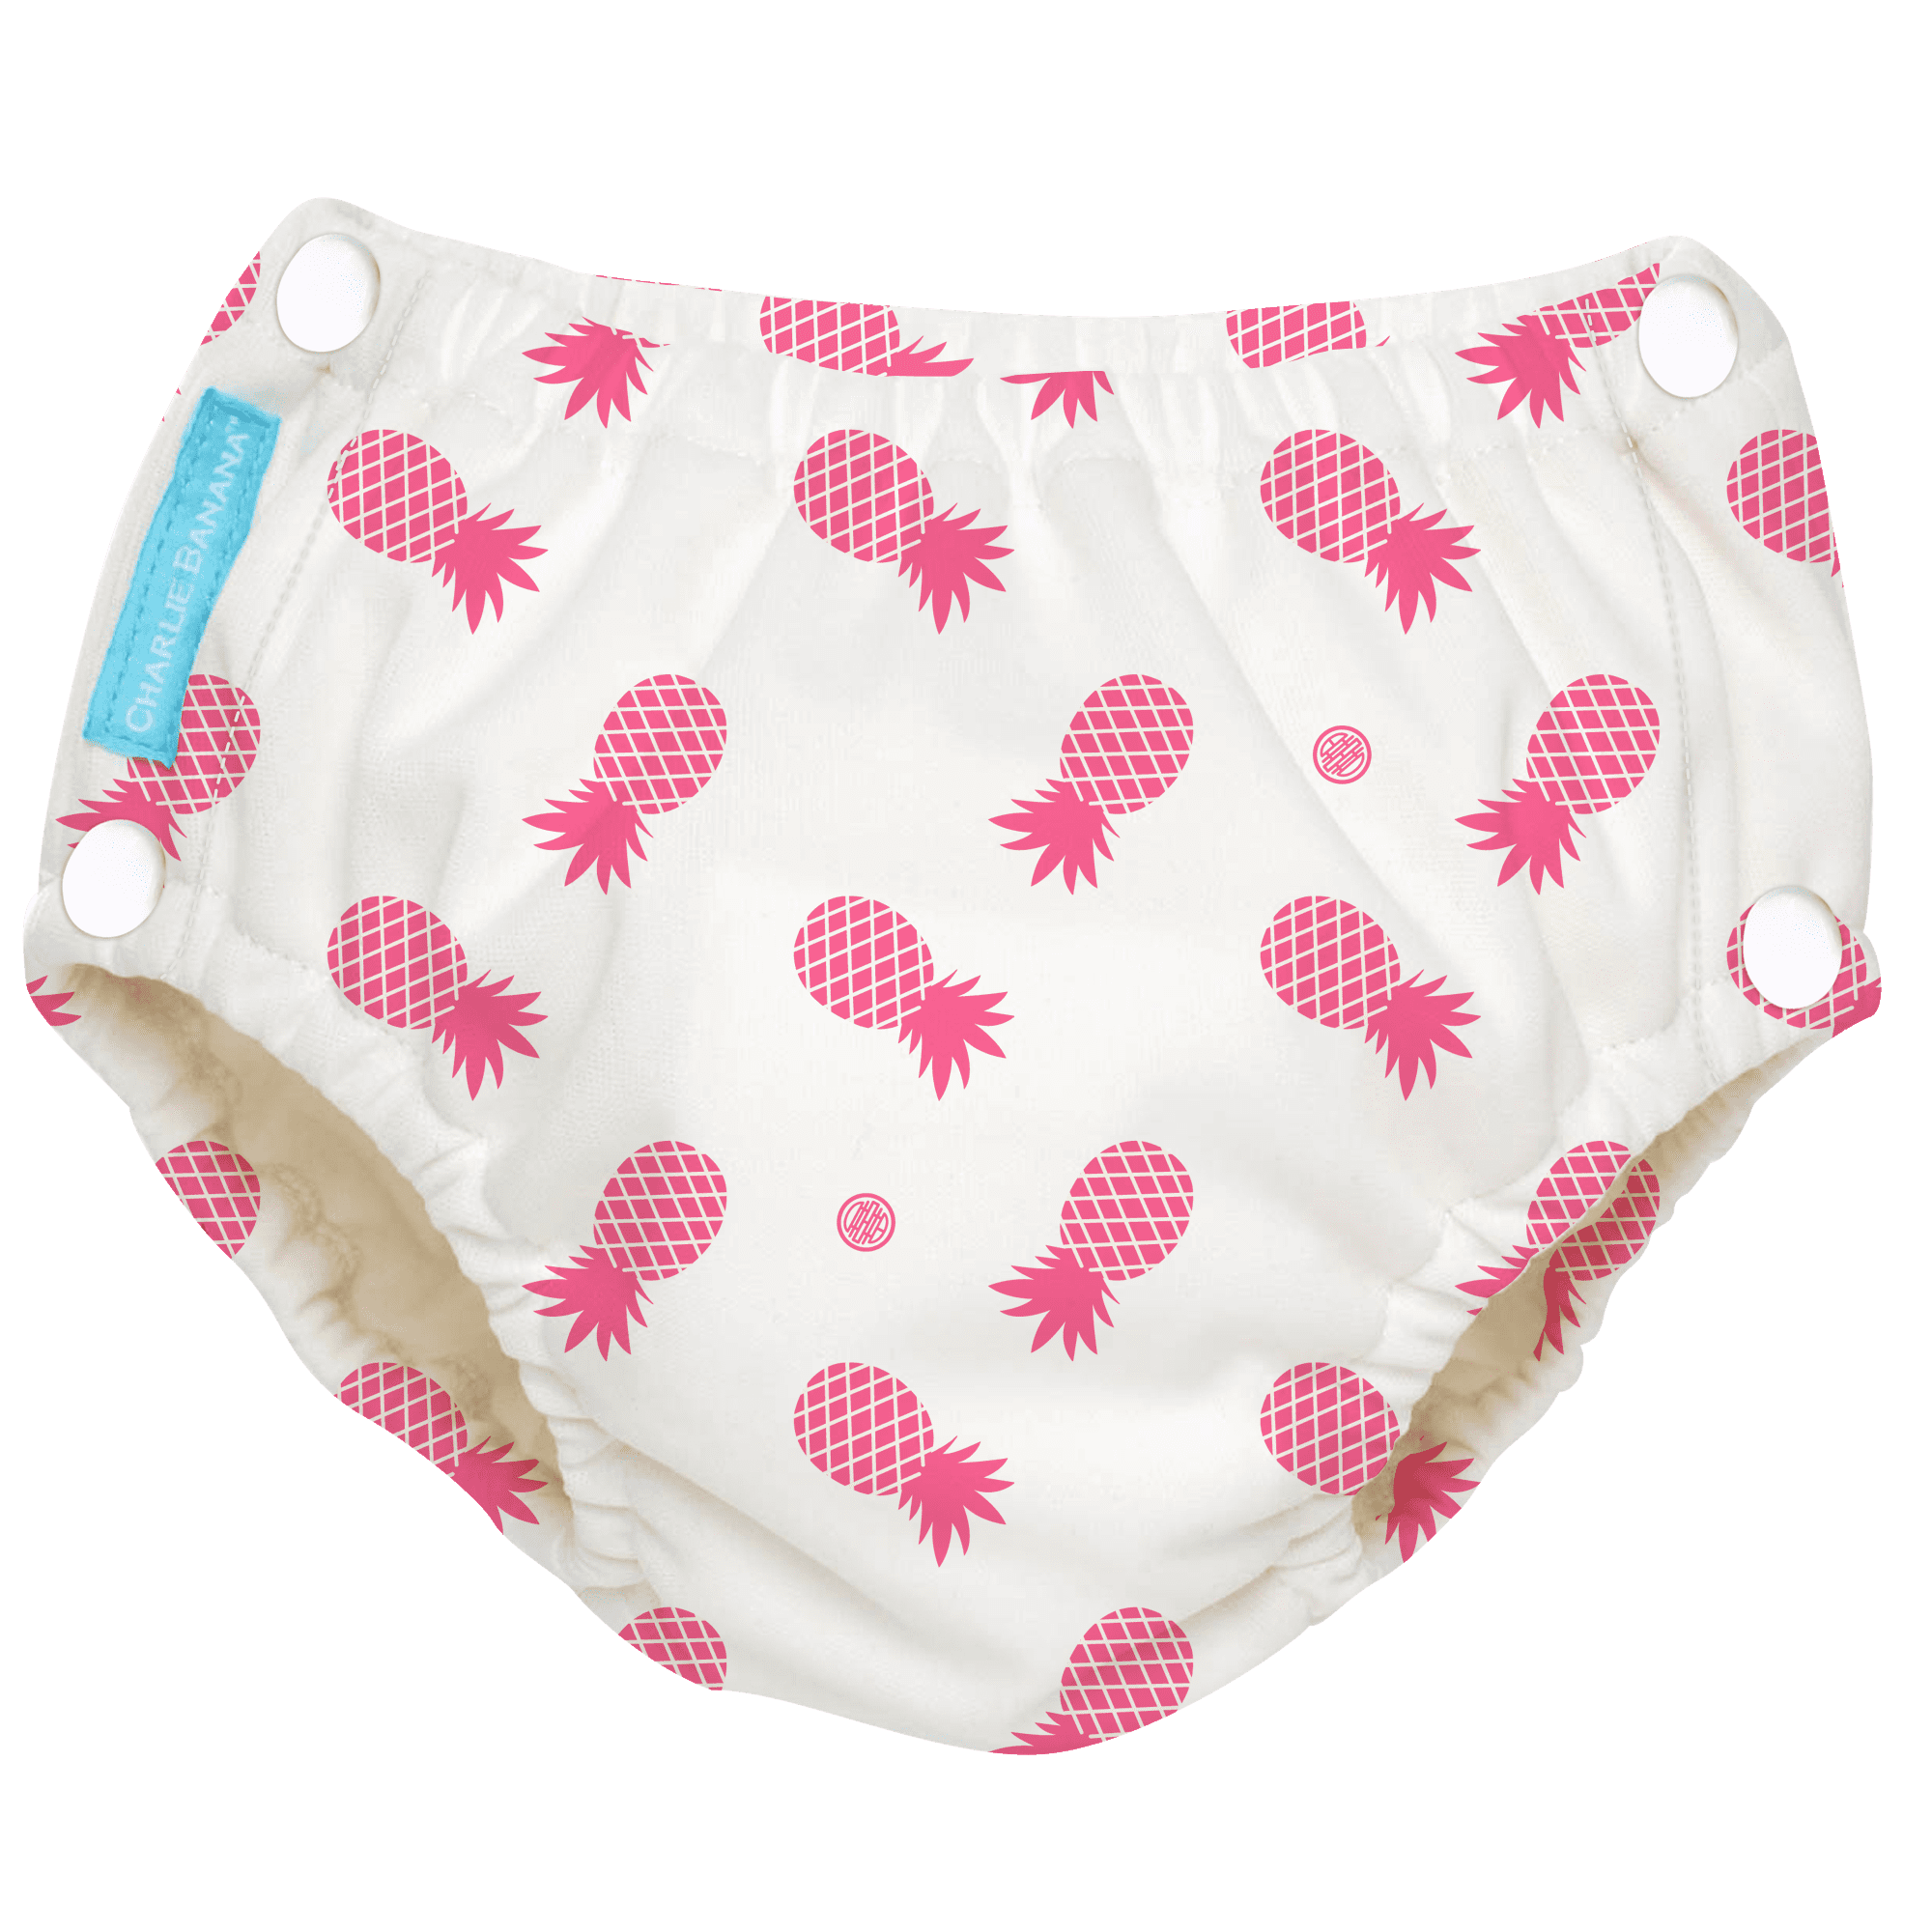 Charlie Banana Baby Easy Snaps Reusable and Washable Swim Diaper for Boys or Girls X-Large Soccer 